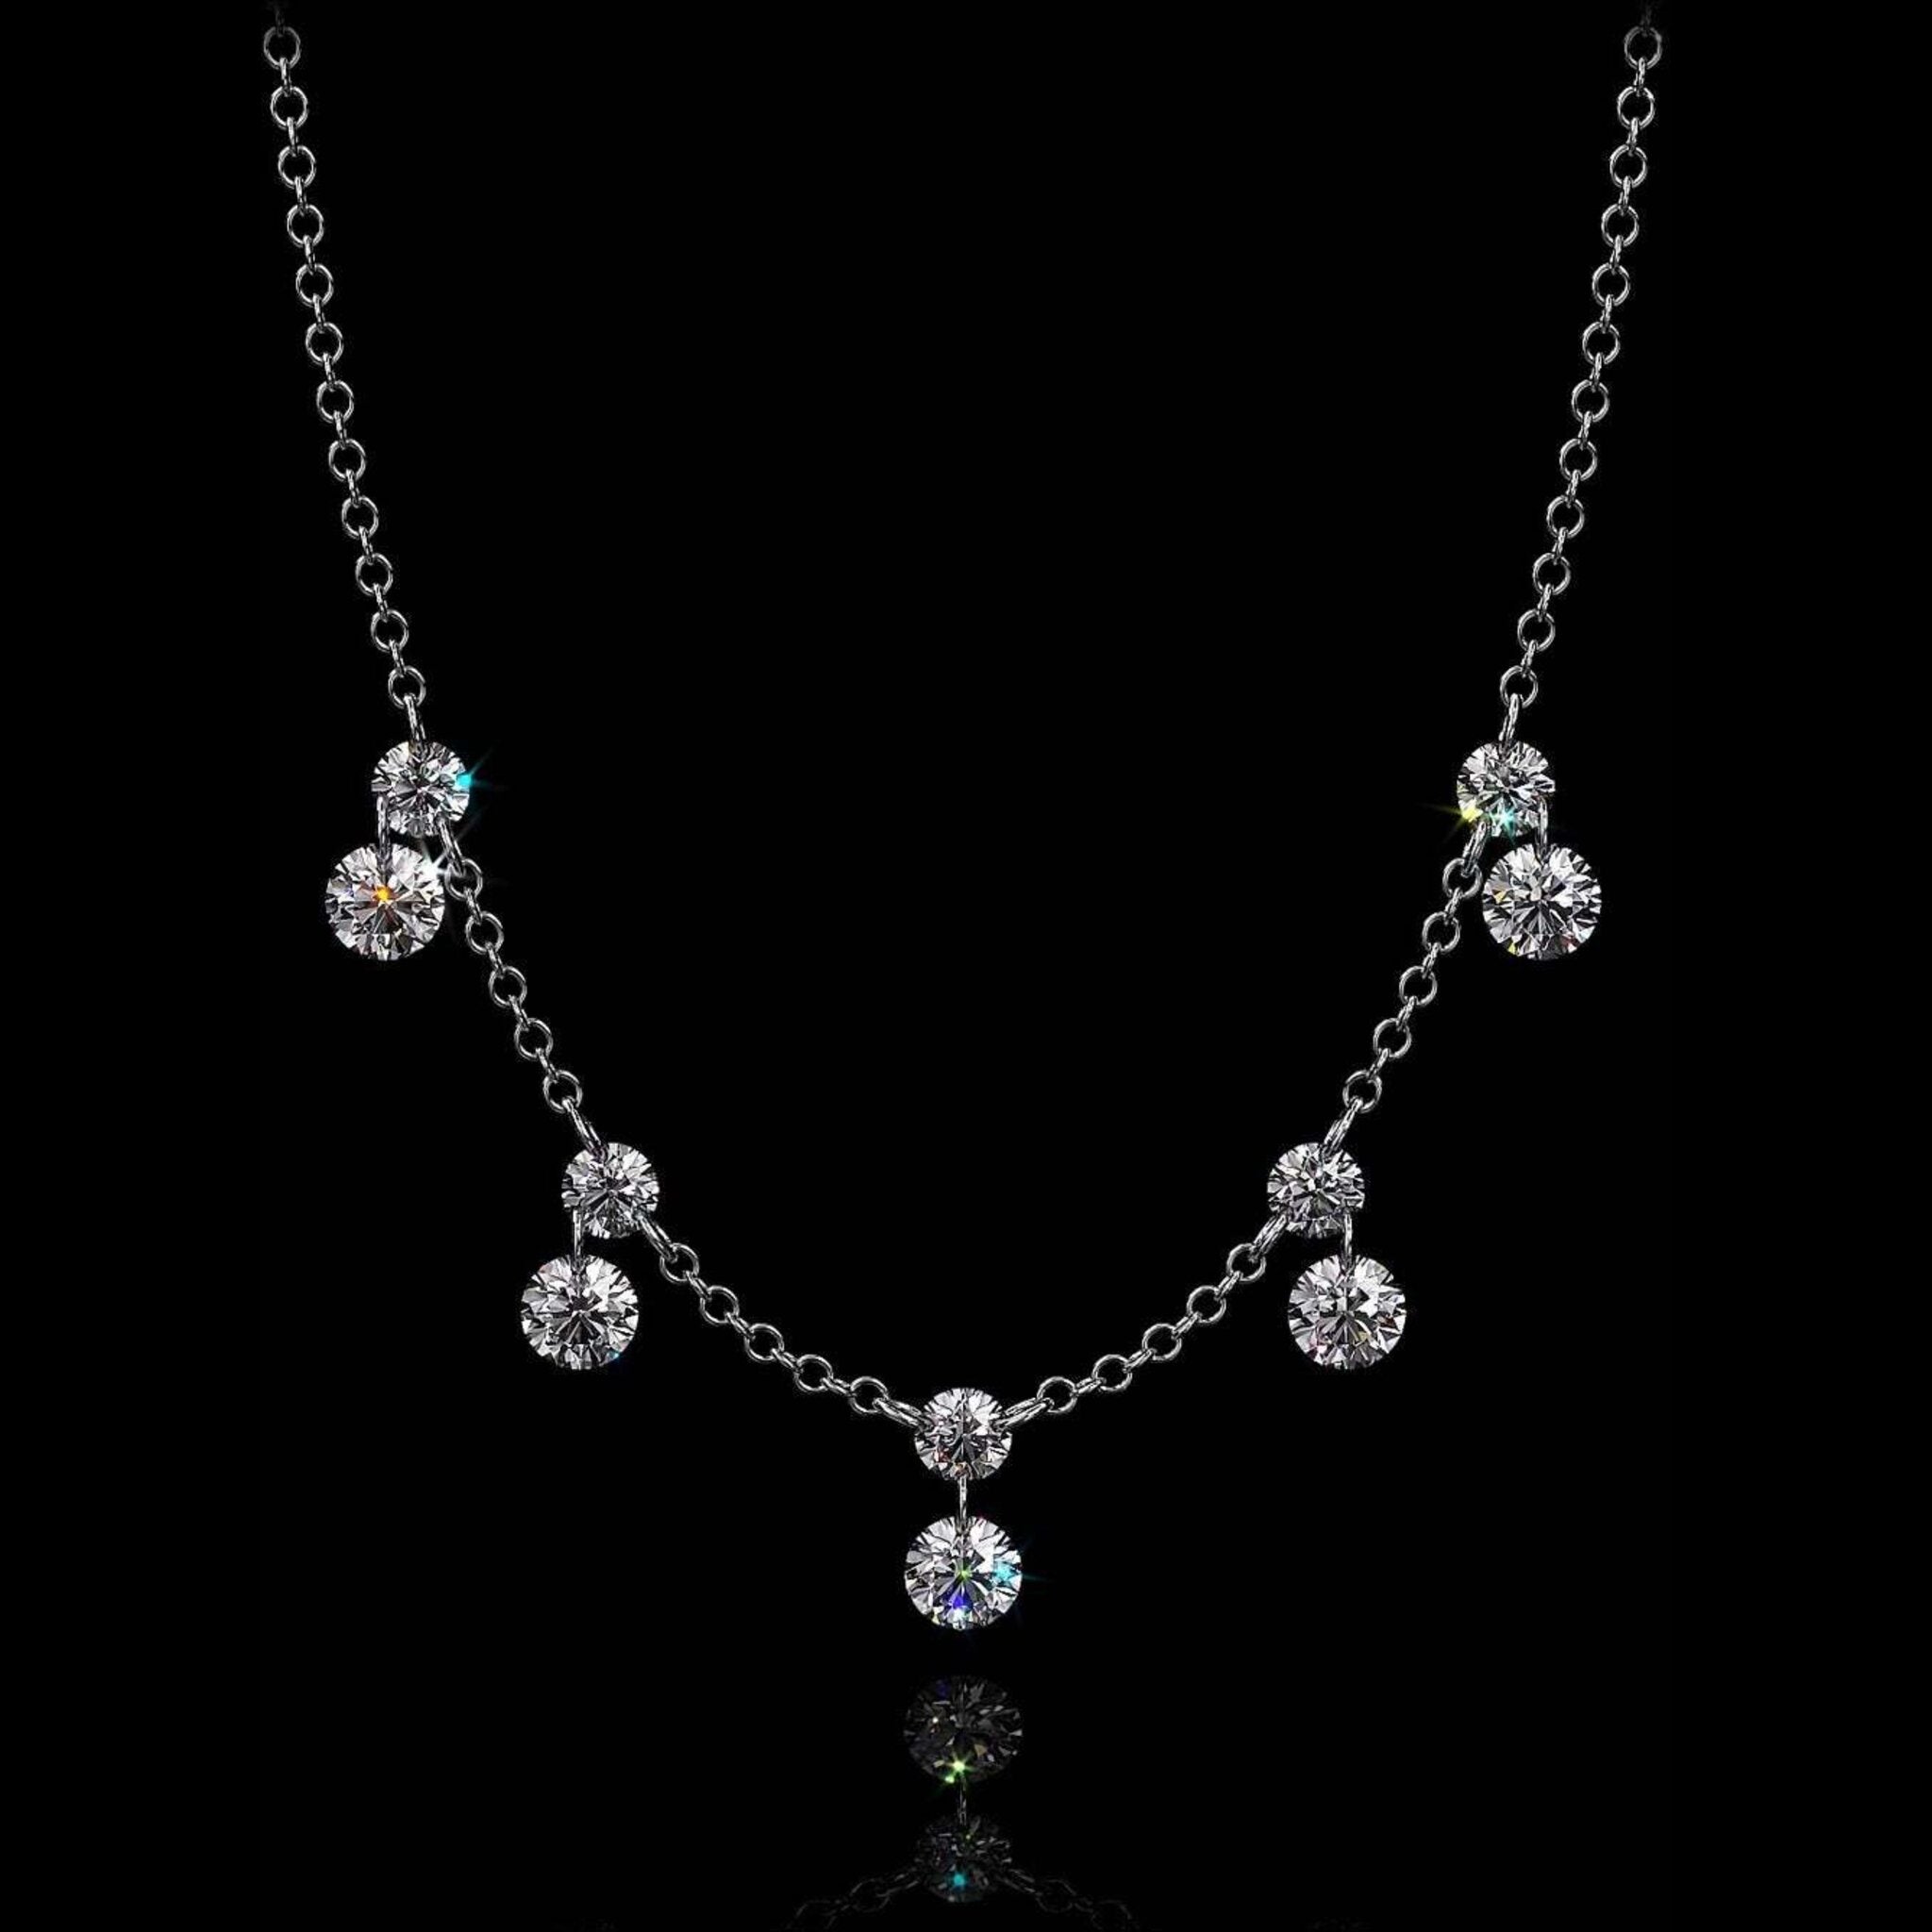 Aresa New York - Shelley No. 10 Necklaces - 18K White Gold with 1.50 cts. of Diamonds